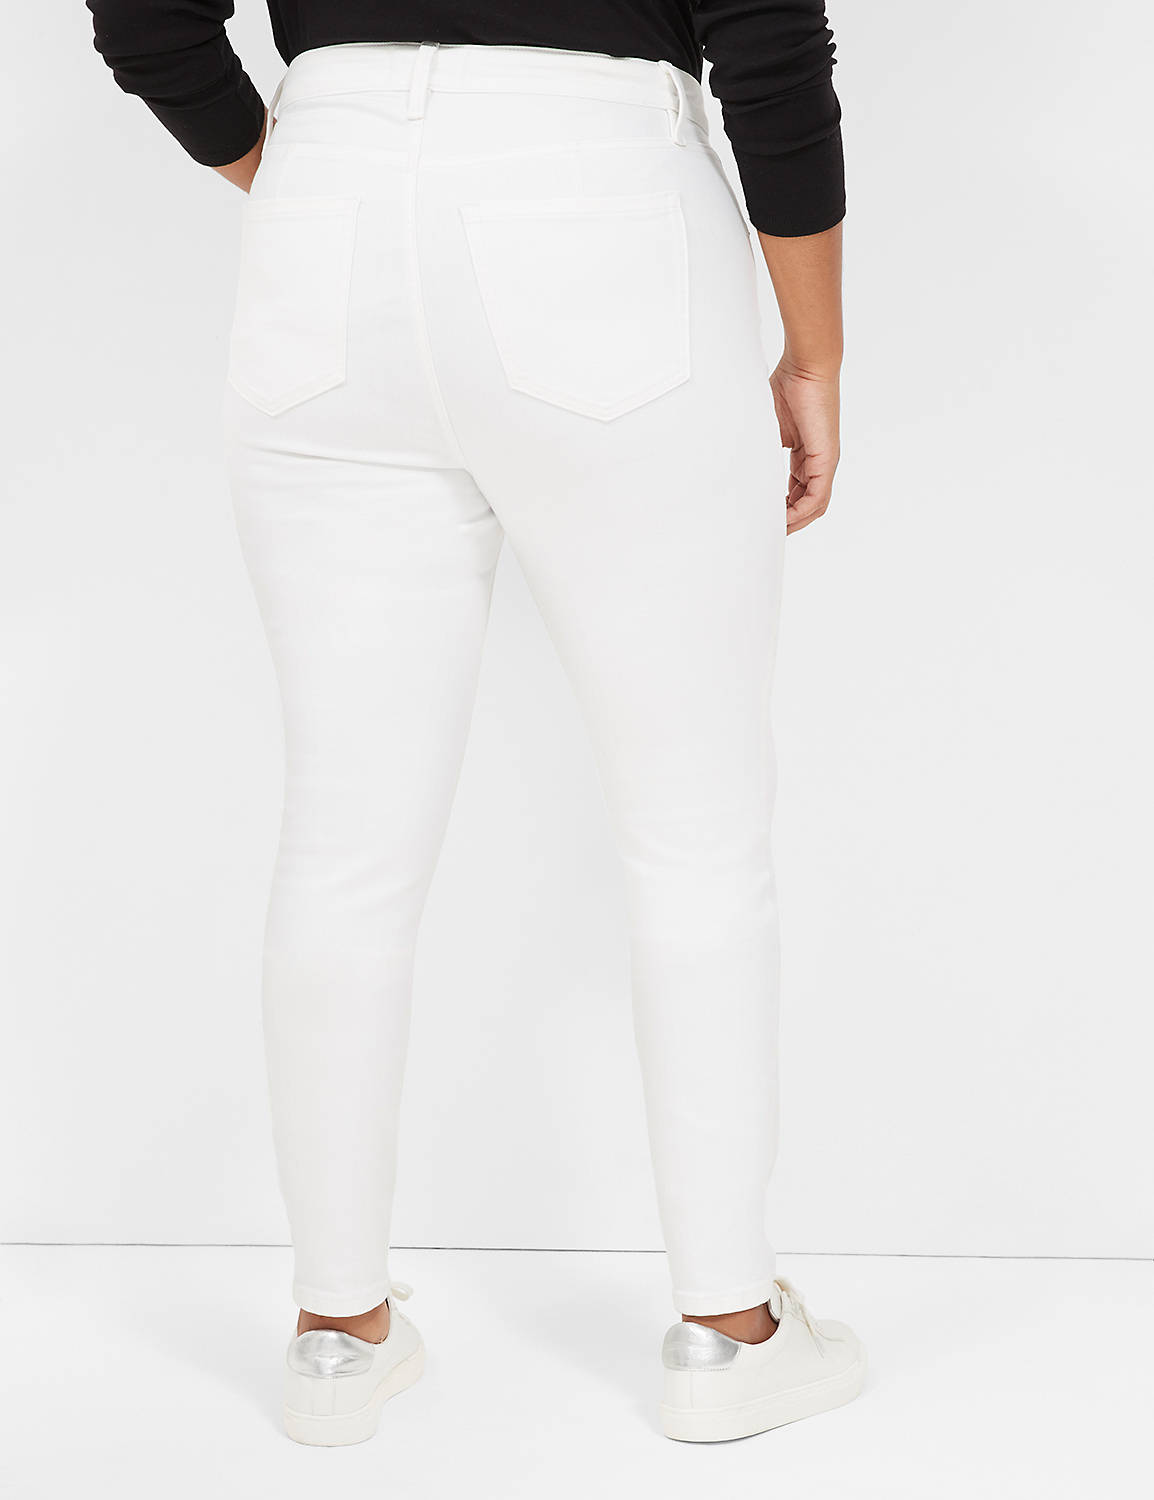 SIGNATURE MID RISE SKINNY - WHITE Y Product Image 2